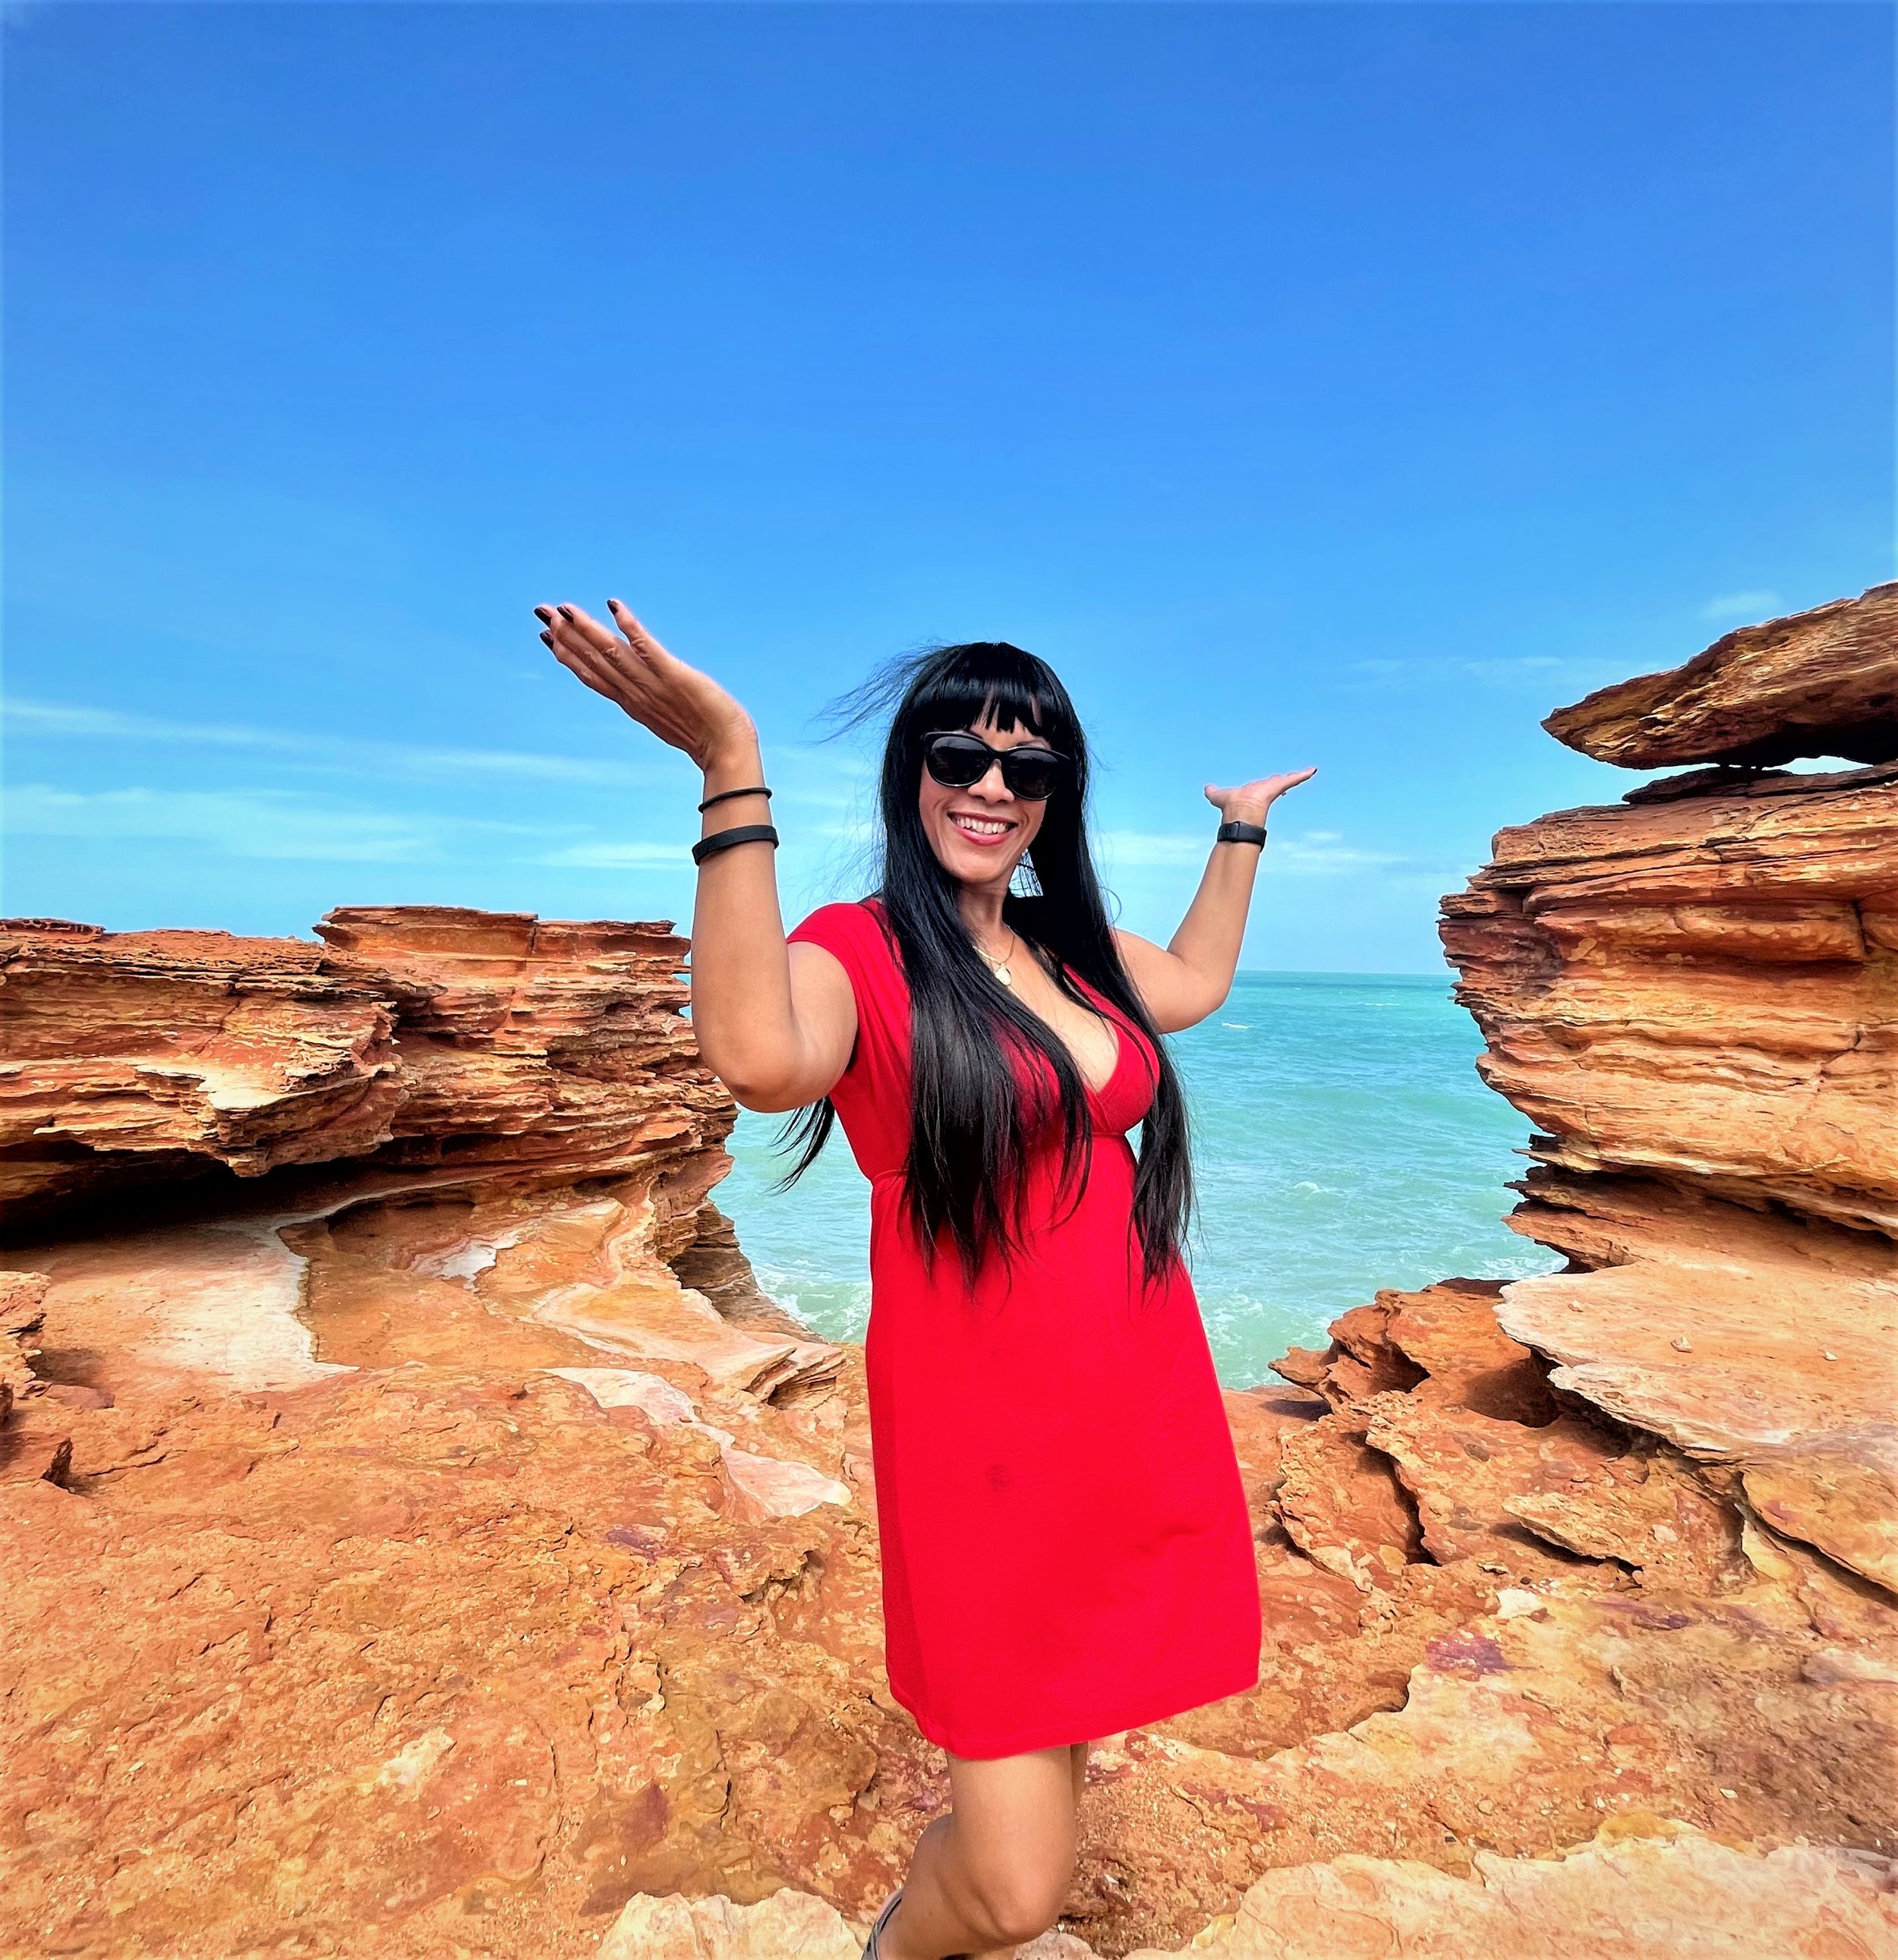 Gantheaume Point Simply Wow Hey Broome Holiday Getaway Red Dress Panoramic town Tour Broome and Around jpg.jpg